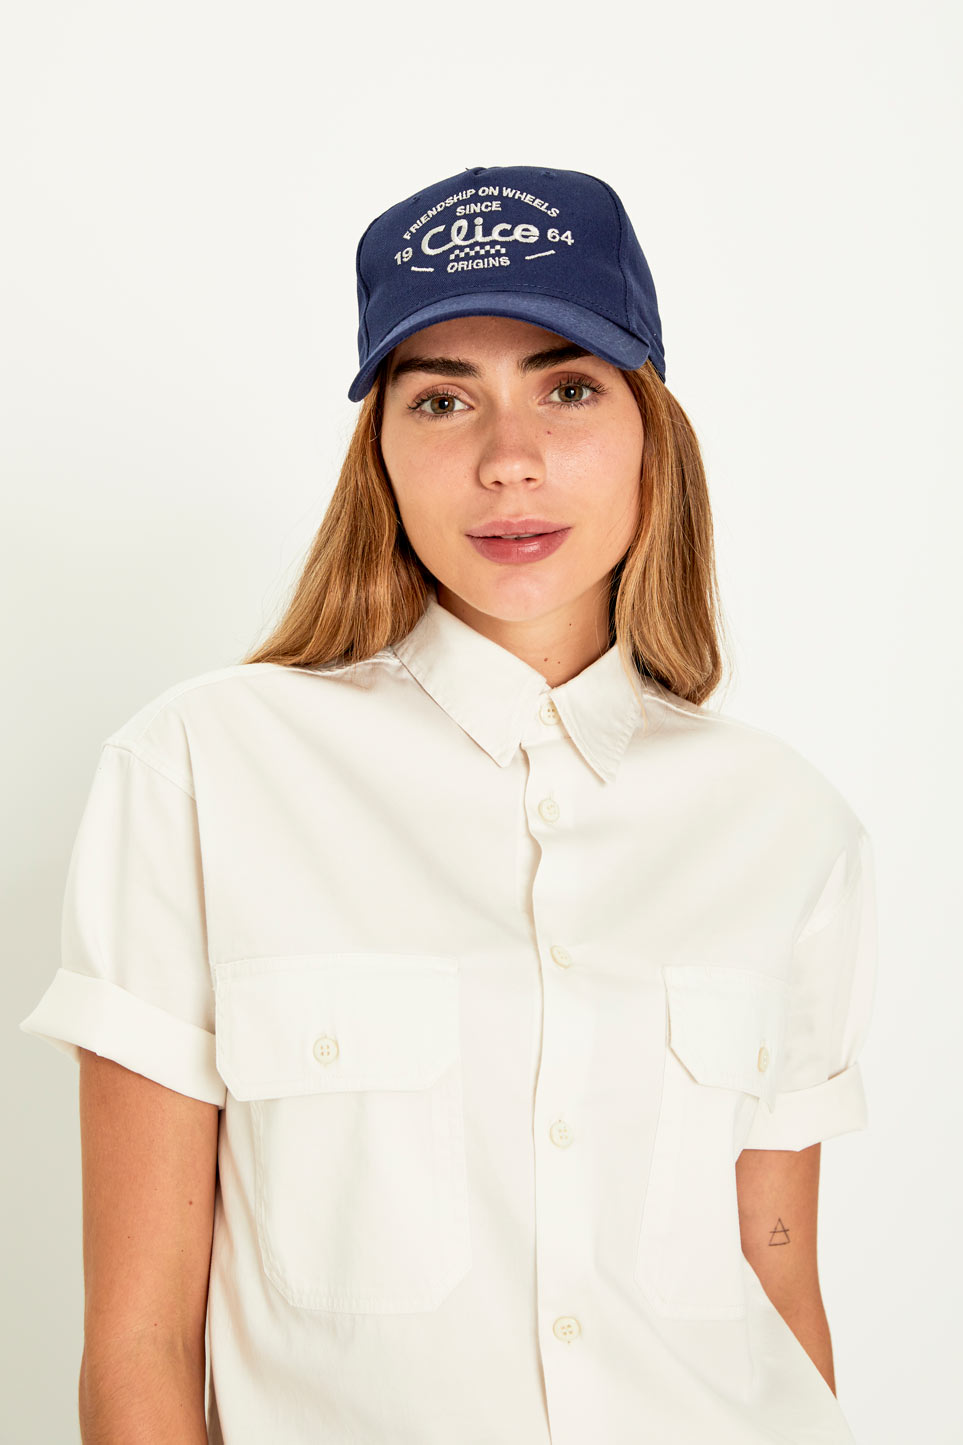 Embroidered cap (Navy)